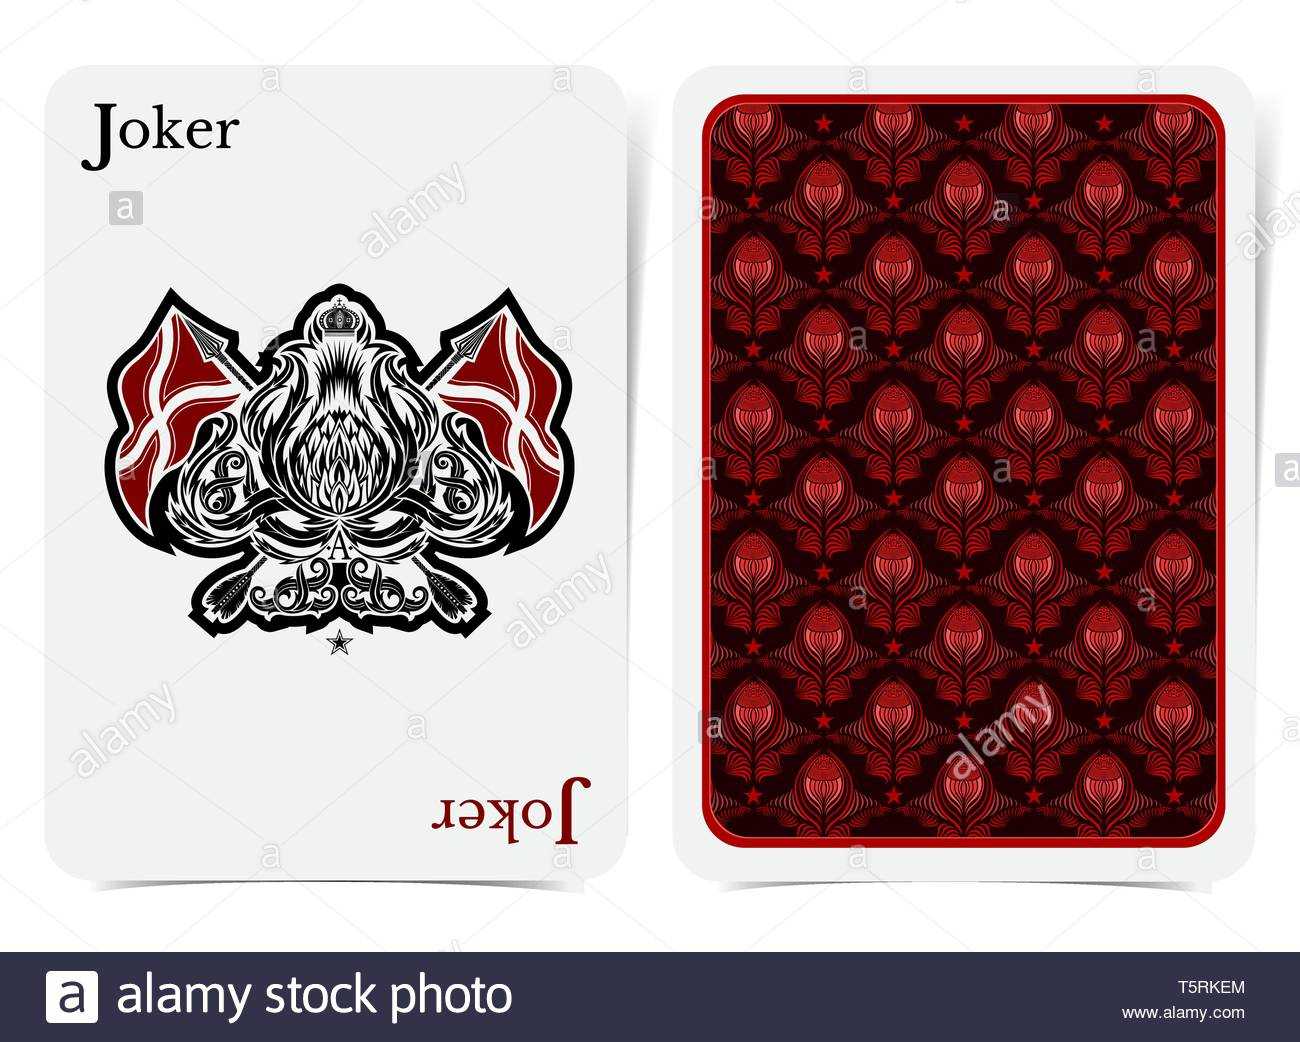 Face Of Joker Card Thistle Plant Pattern With Crossed Flags For Joker Card Template